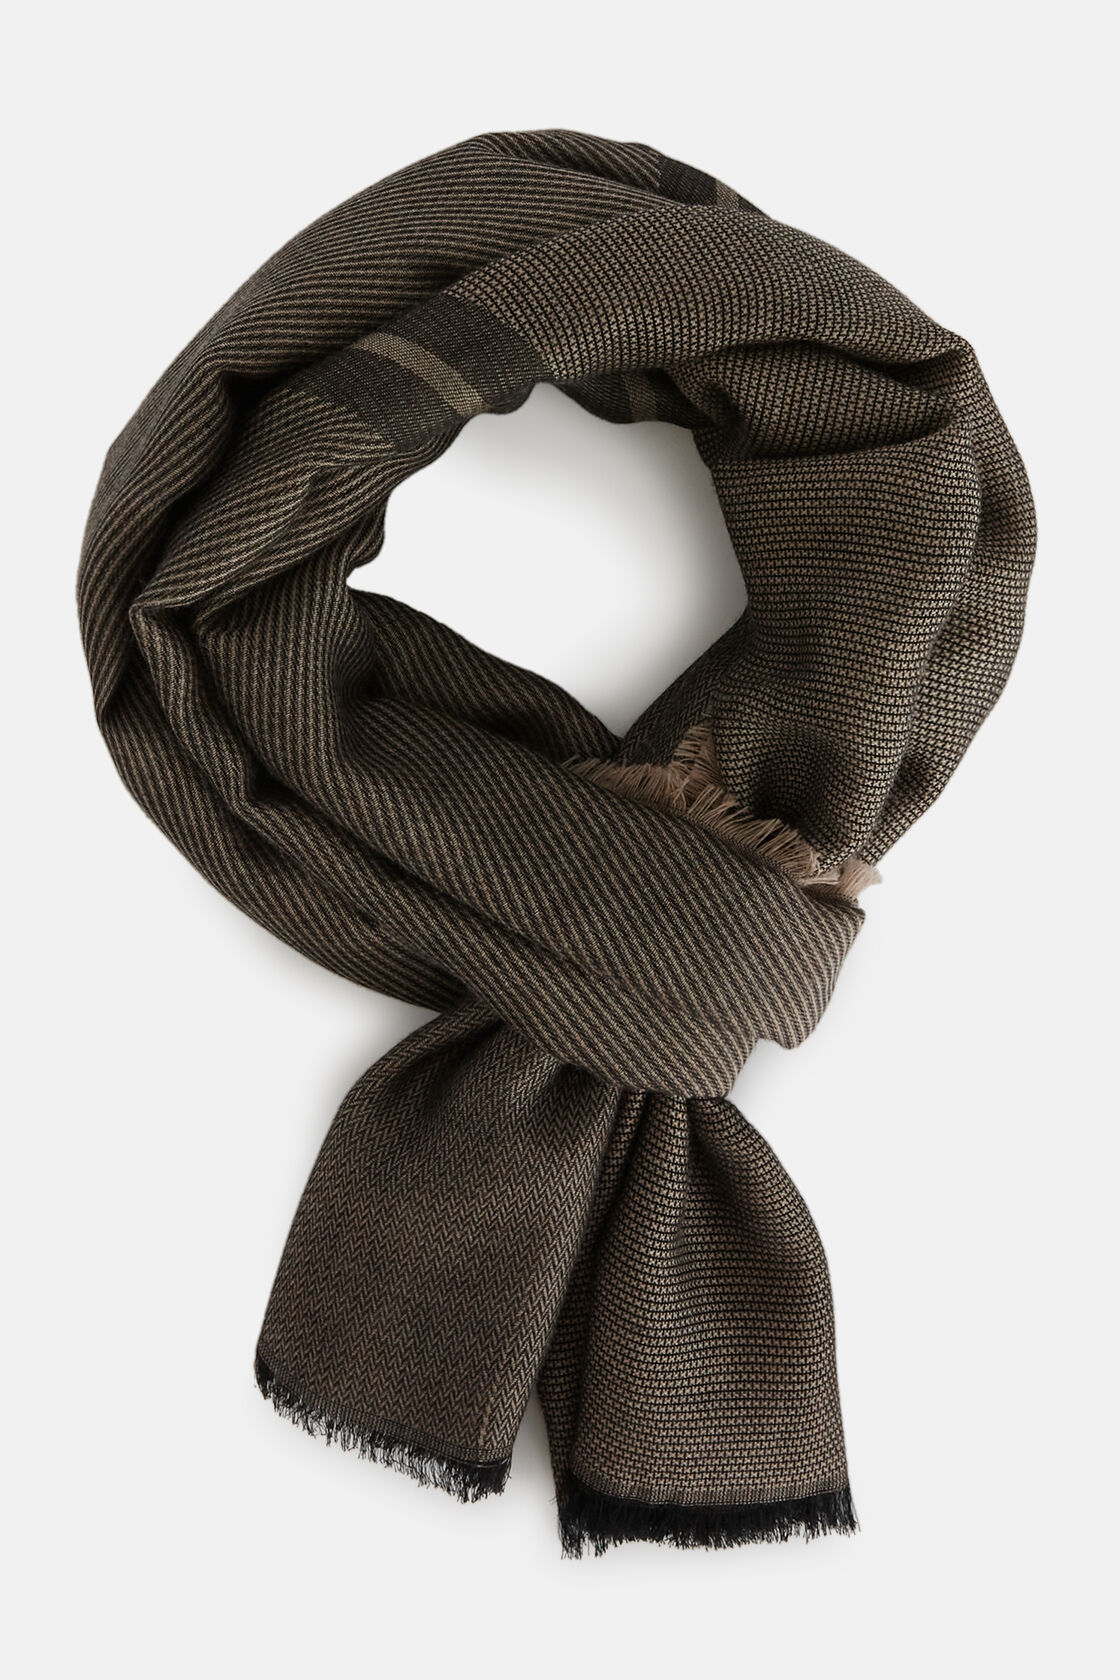 Wool and Modal Scarf, TAUPE, hi-res